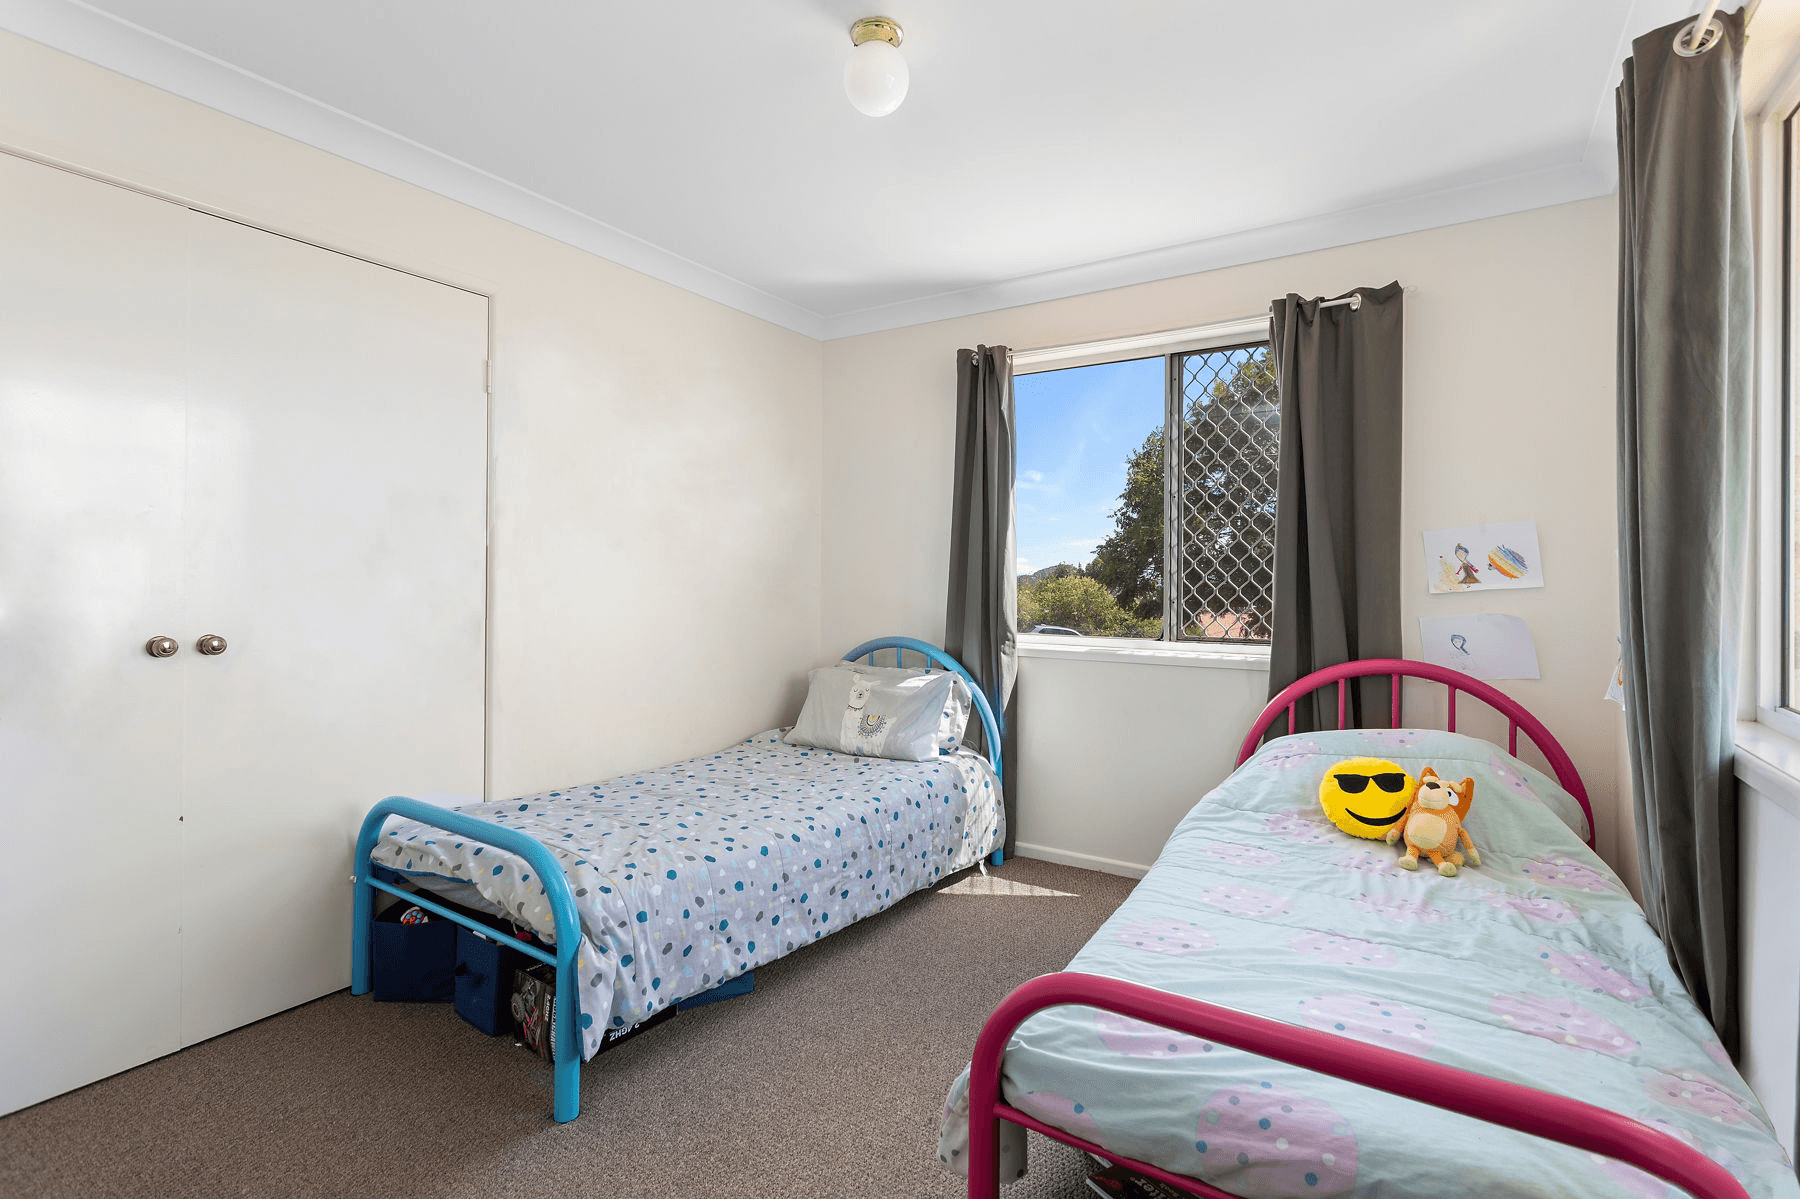 1/3 Quinlan Court, DARLING HEIGHTS, QLD 4350